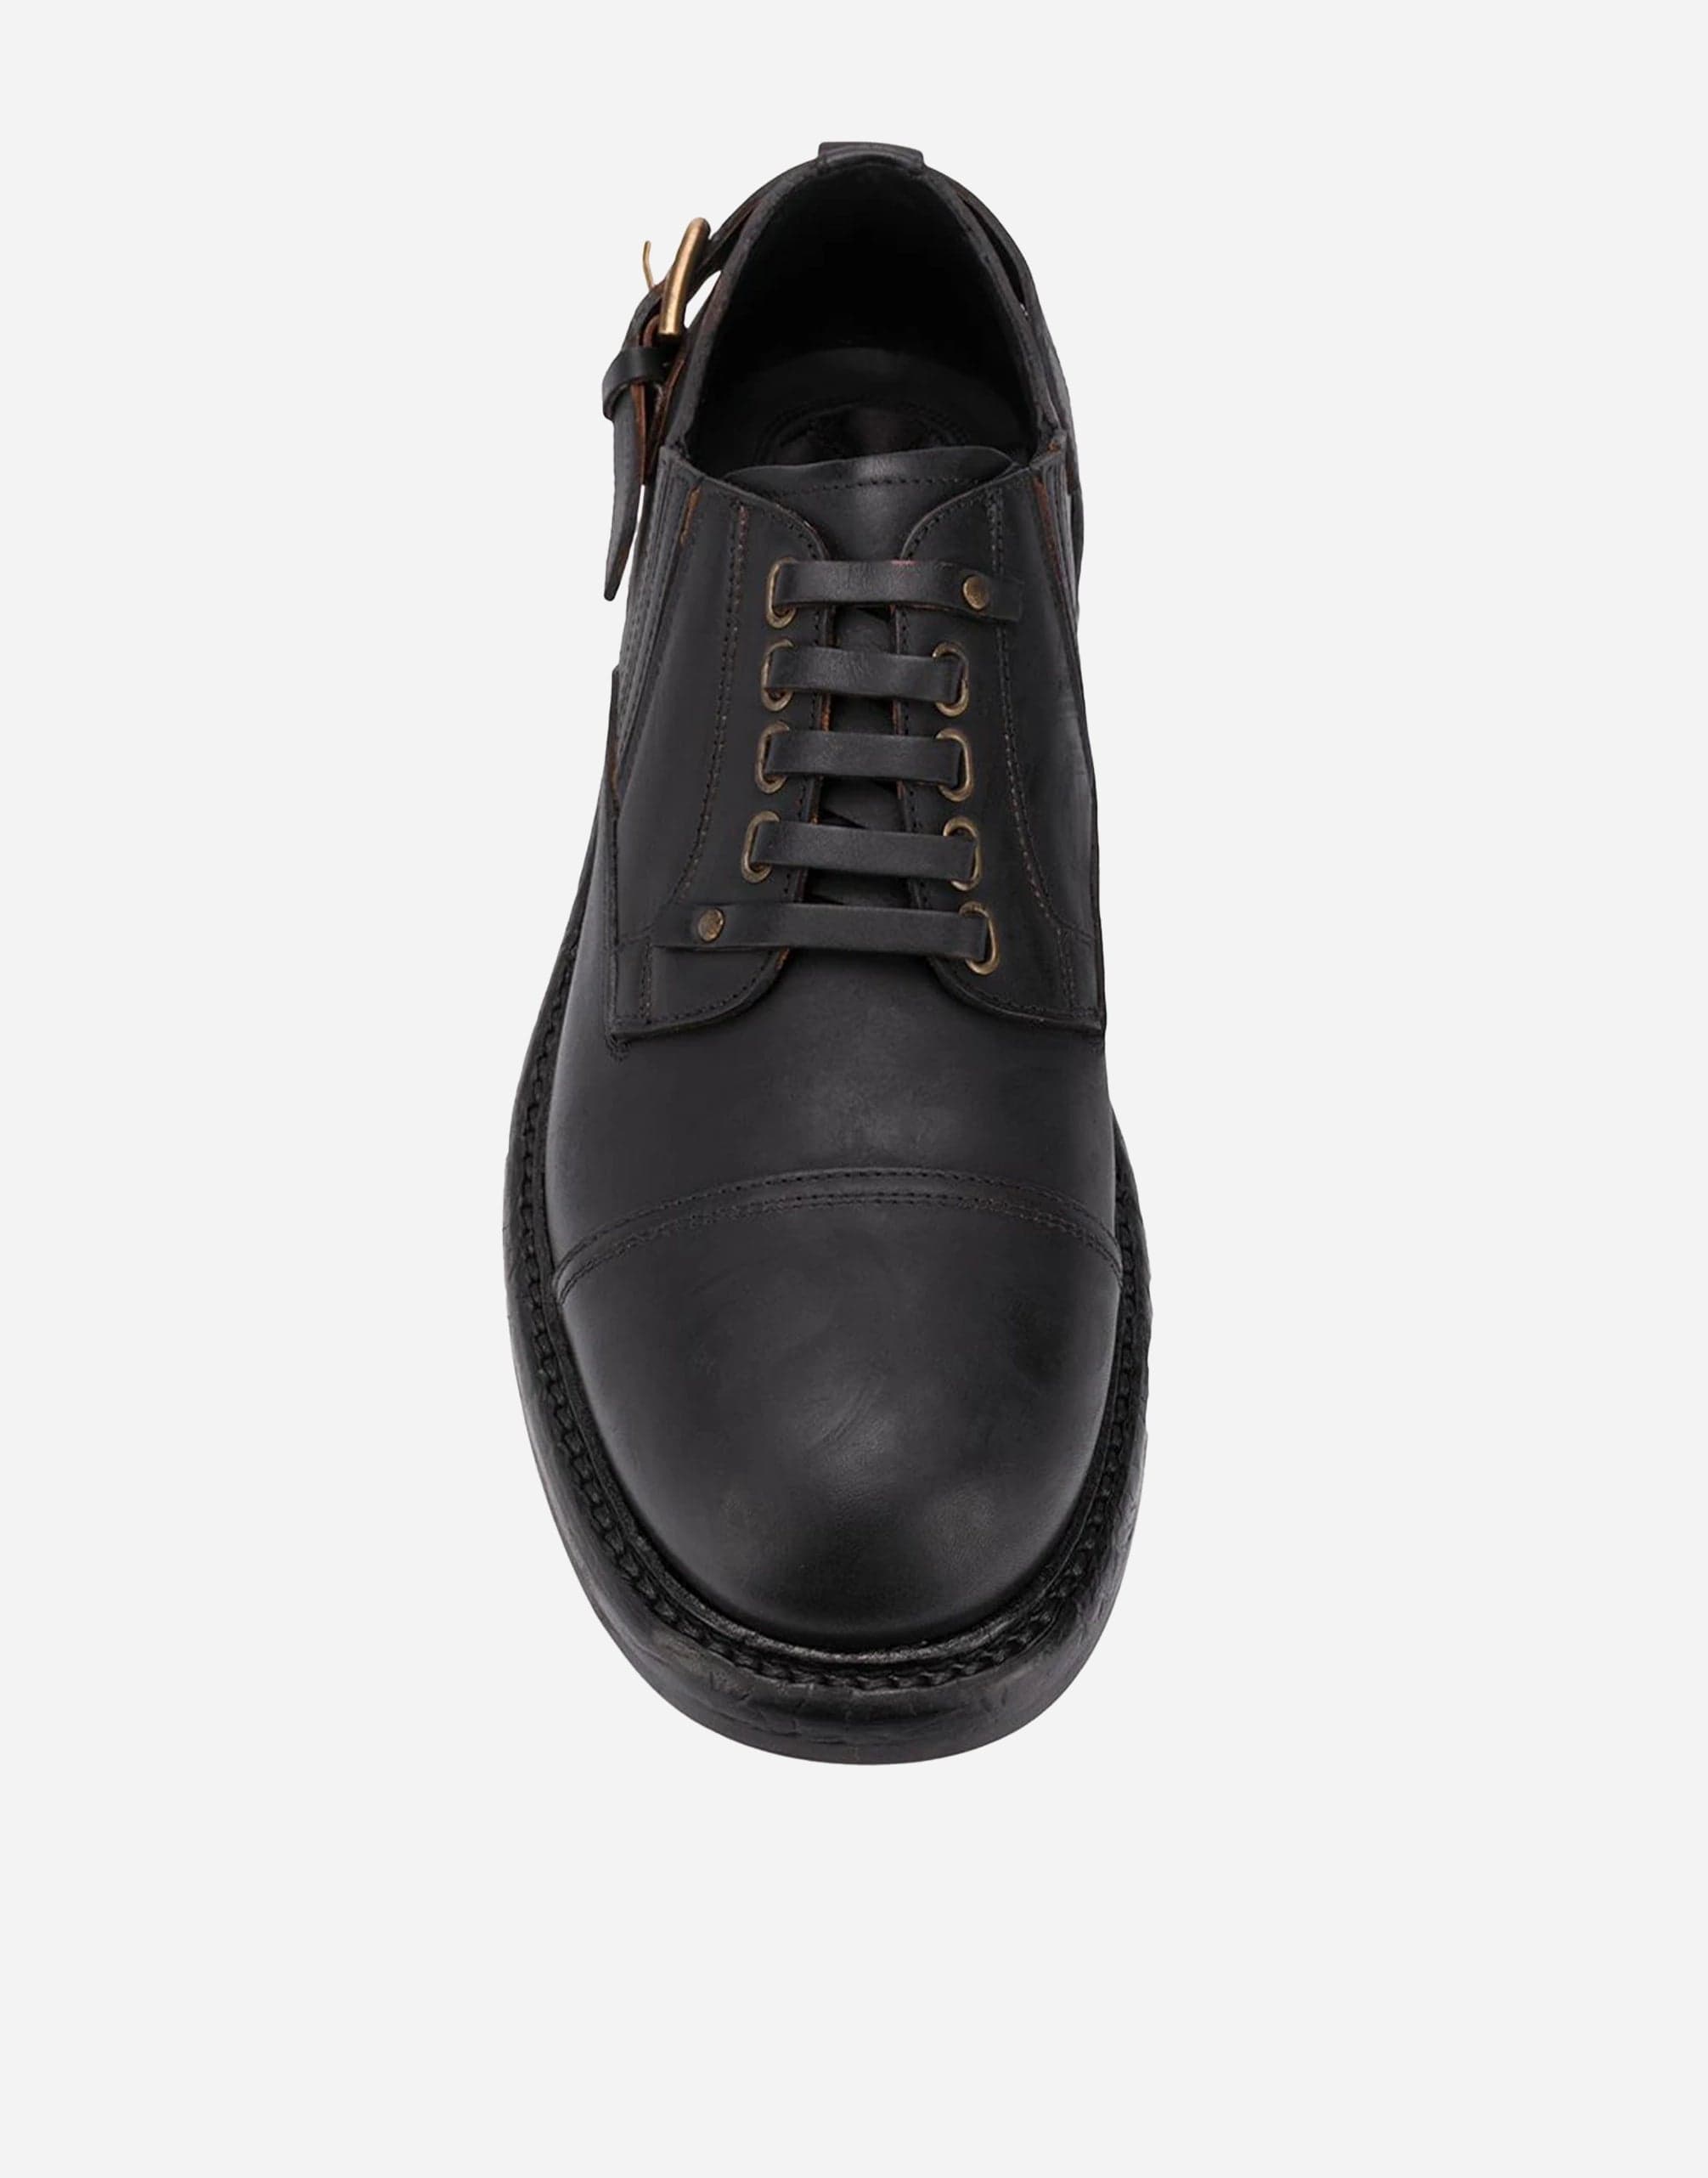 Dolce & Gabbana Leather Buckle Derby Shoes